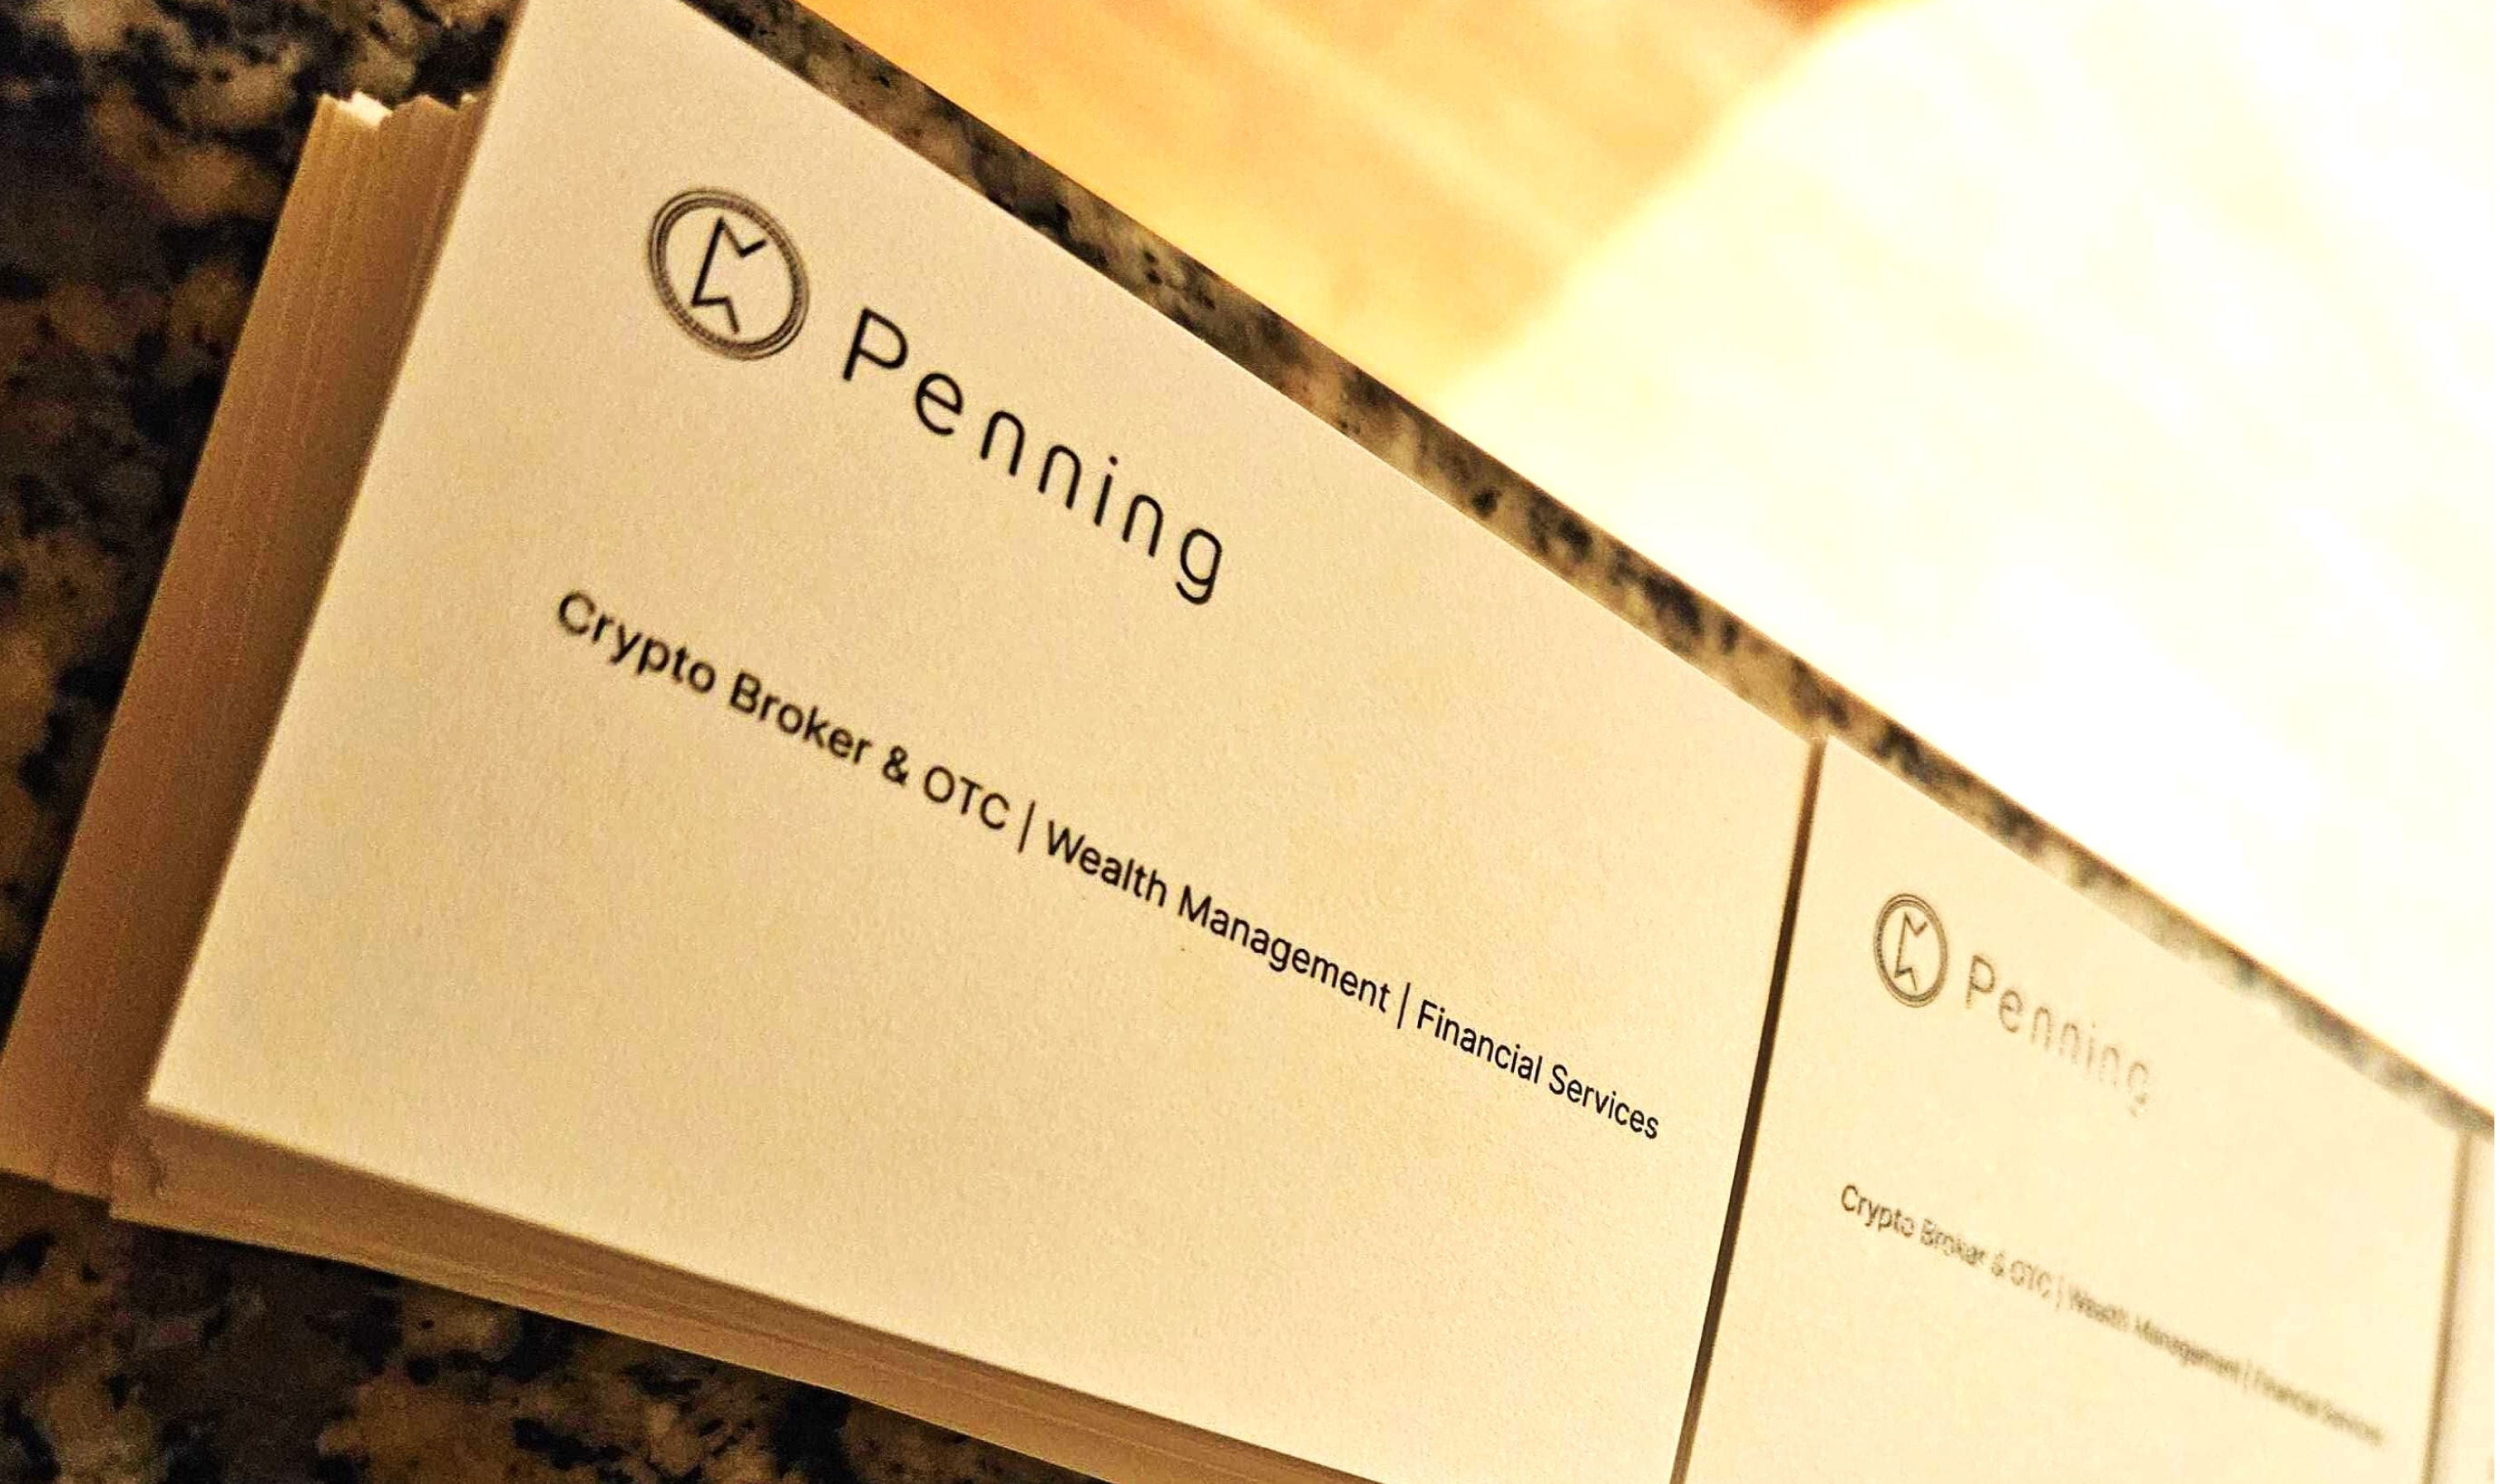 Image of Penning business cards